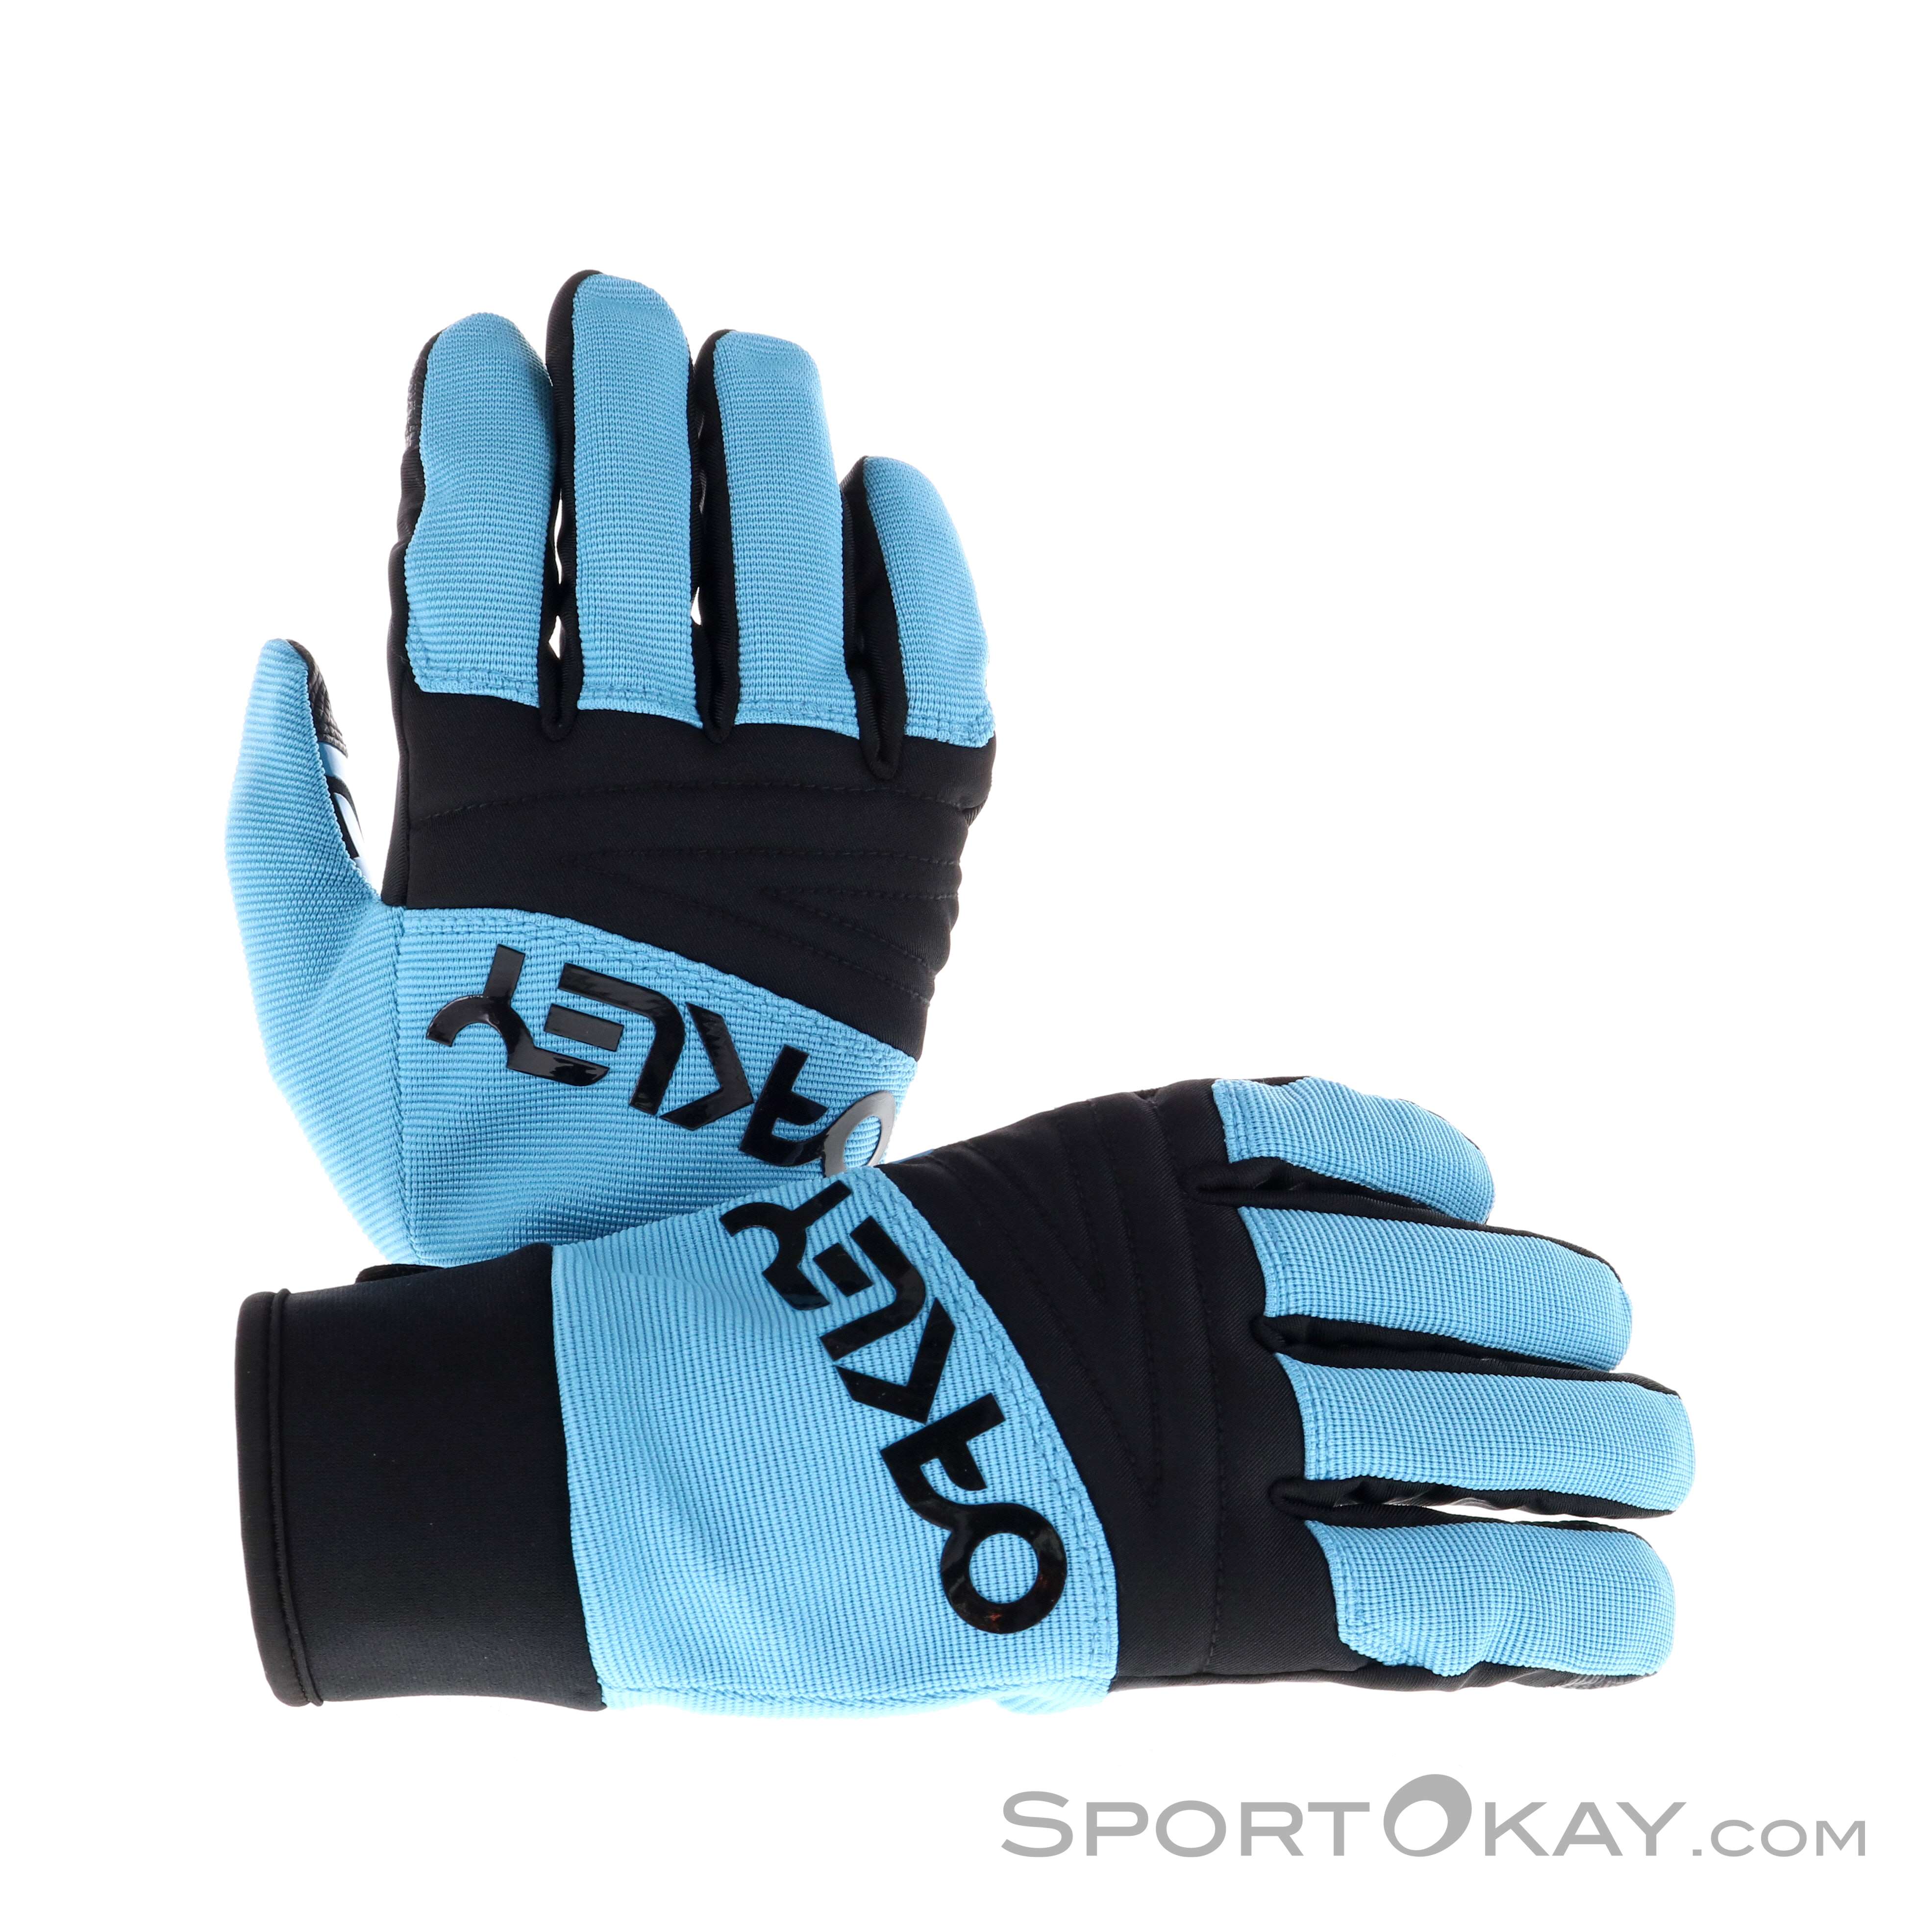 Oakley Factory Pilot Gloves - Gloves - Outdoor Clothing - Outdoor 